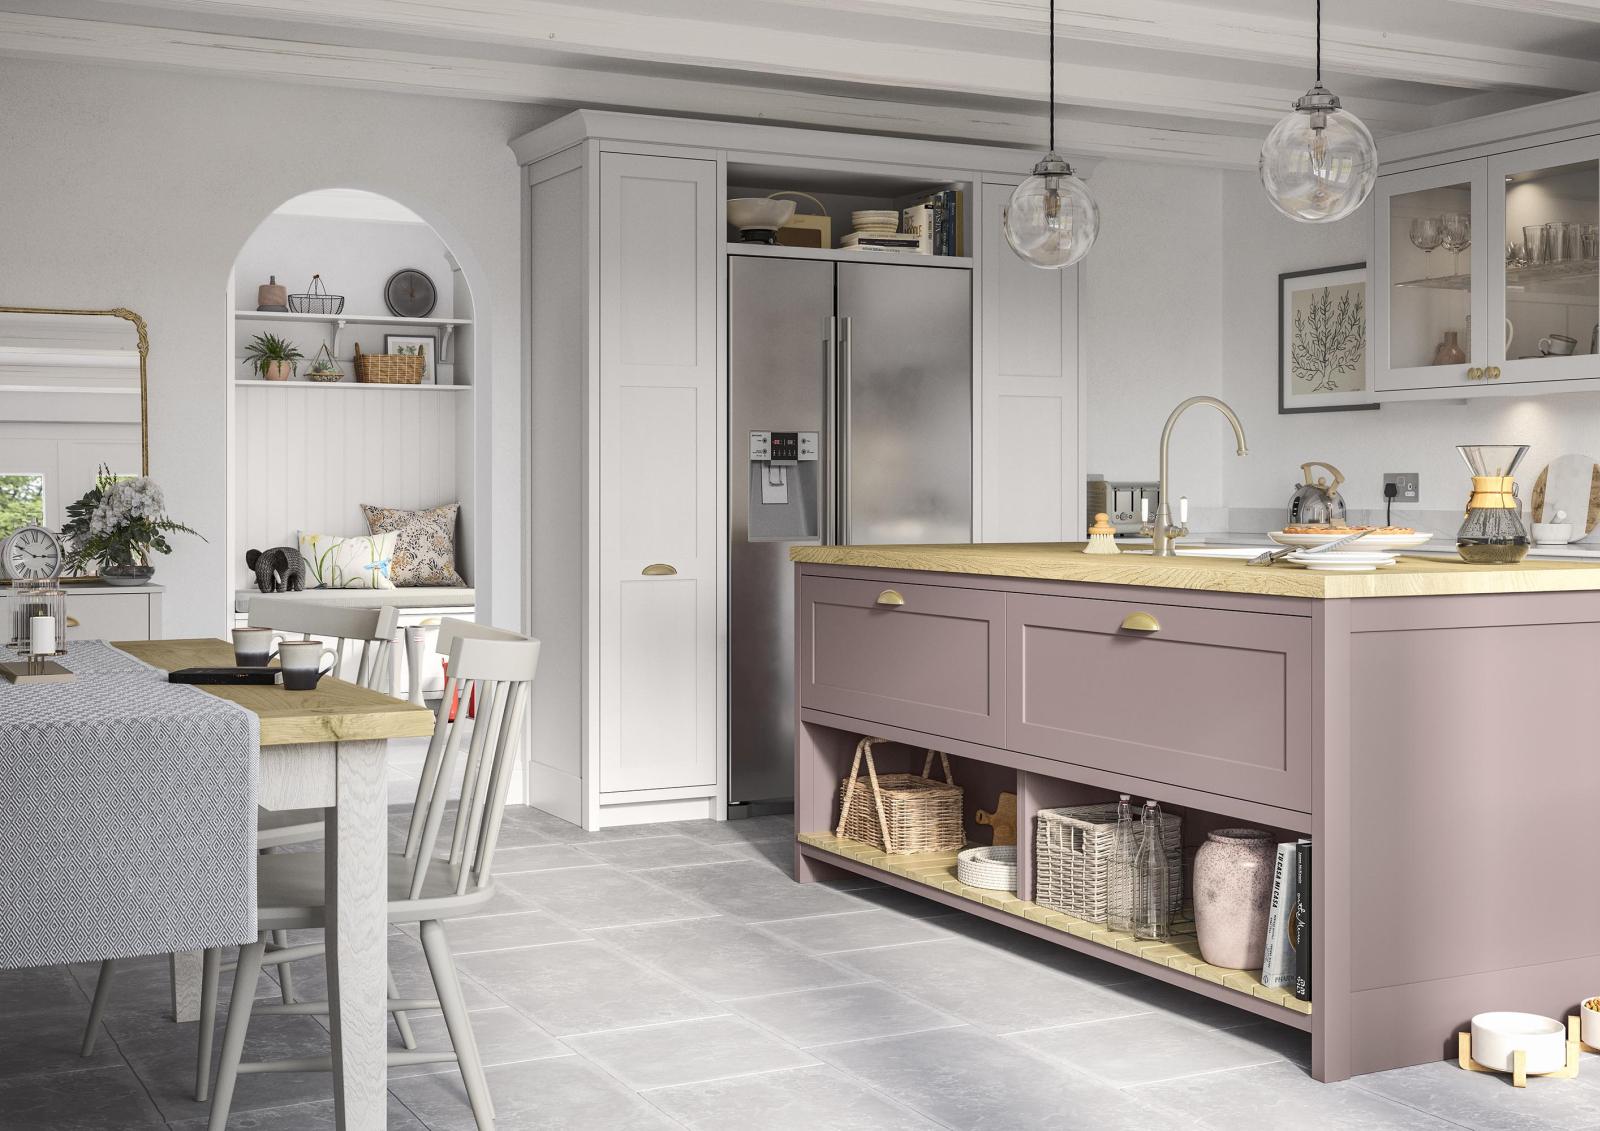 Smooth-finish, slim-frame, shaker-style kitchen painted vintage pink and light grey featuring island unit with pendant lighting above and an american fridge freezer framed by floor to ceiling cabinets